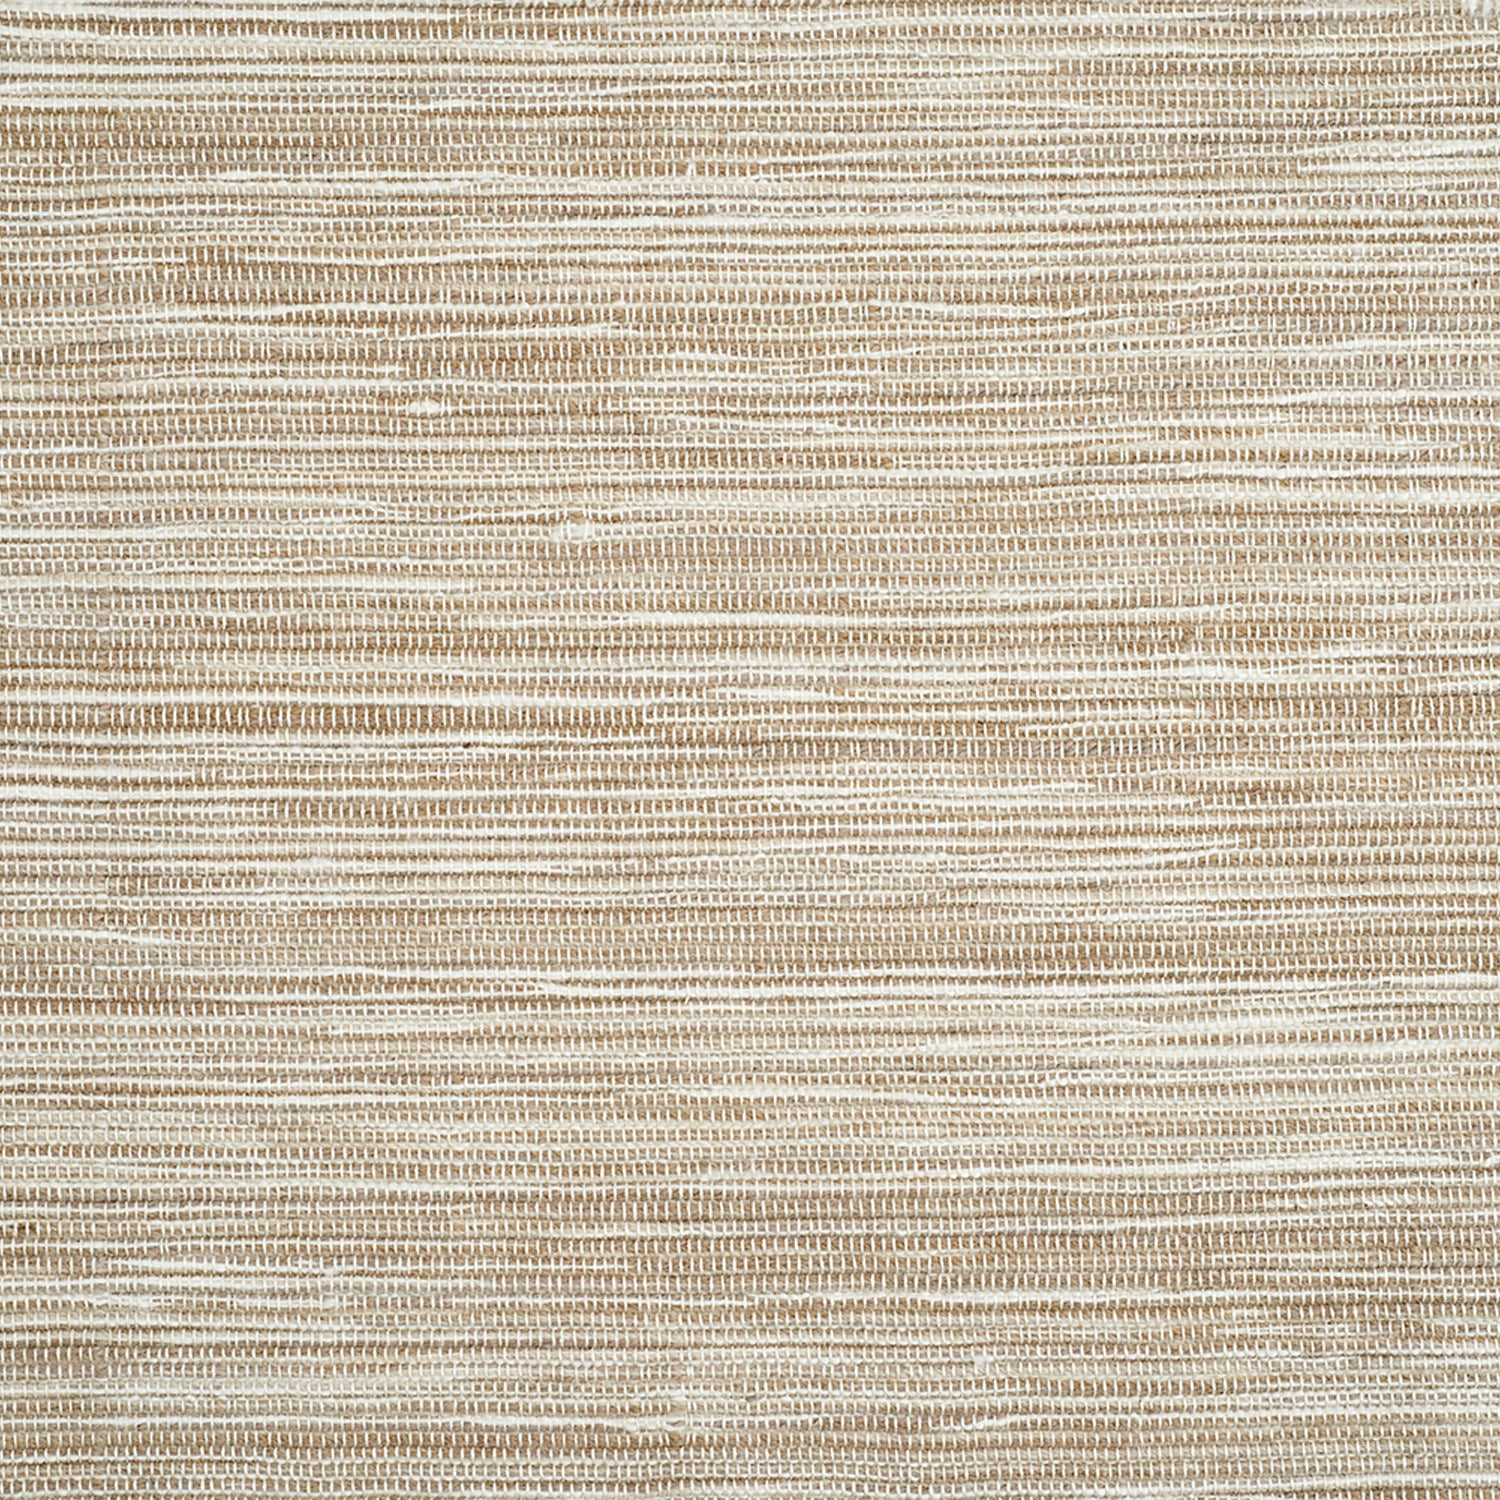 Wool-blend broadloom carpet swatch in a flat weave in mottled shades of cream and tan.